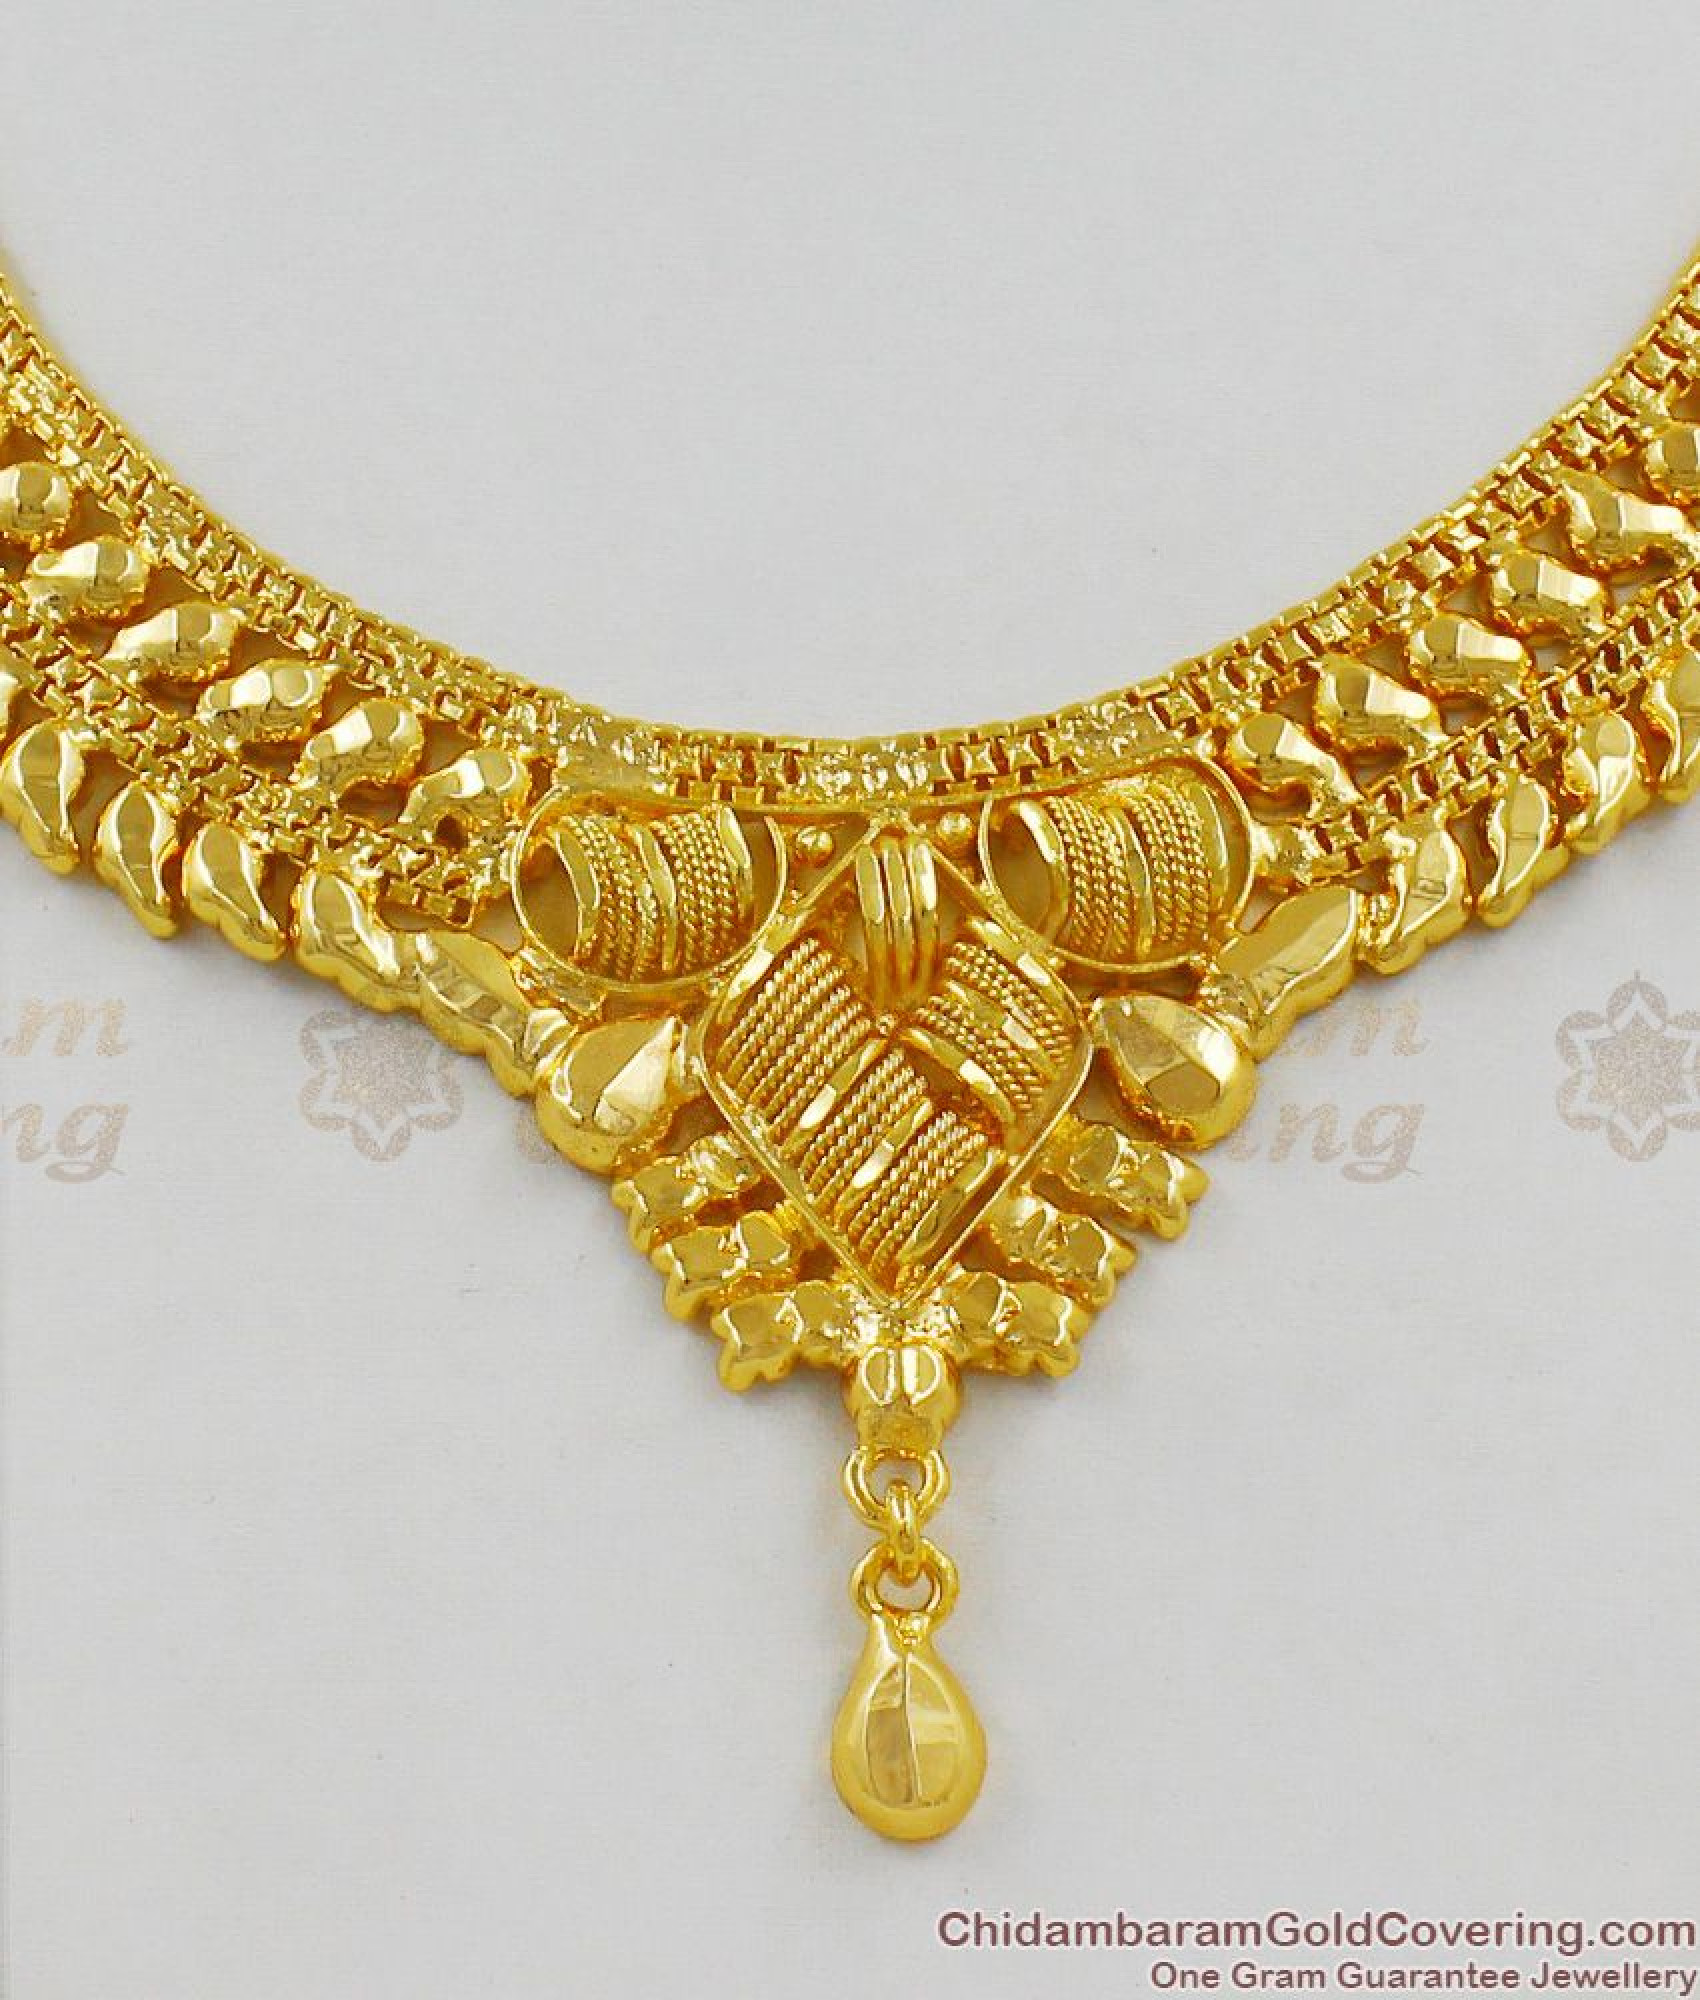 Tremendous Calcutta Design Gold Plated Bridal Necklace Jewelry For ...